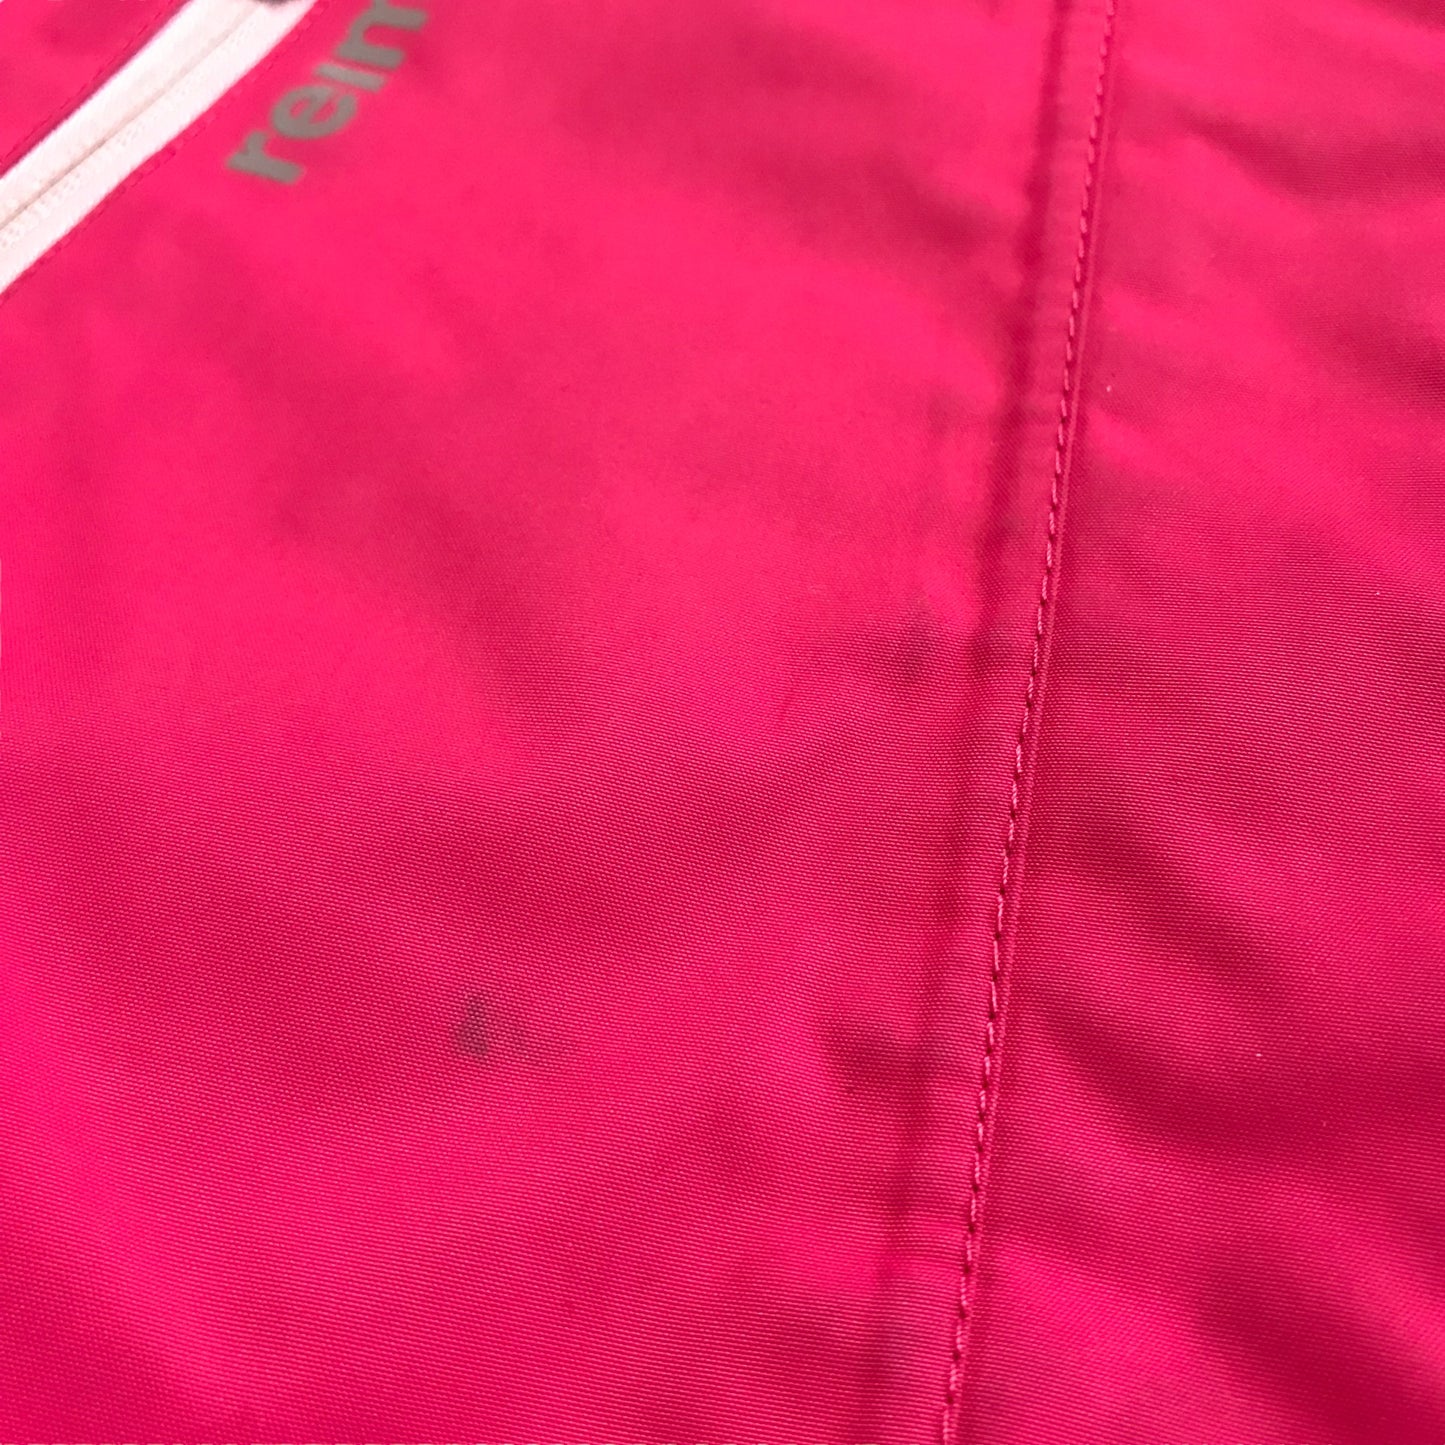 Reima Jacket Age 9-10 Pink Water Resistant Hard Shell